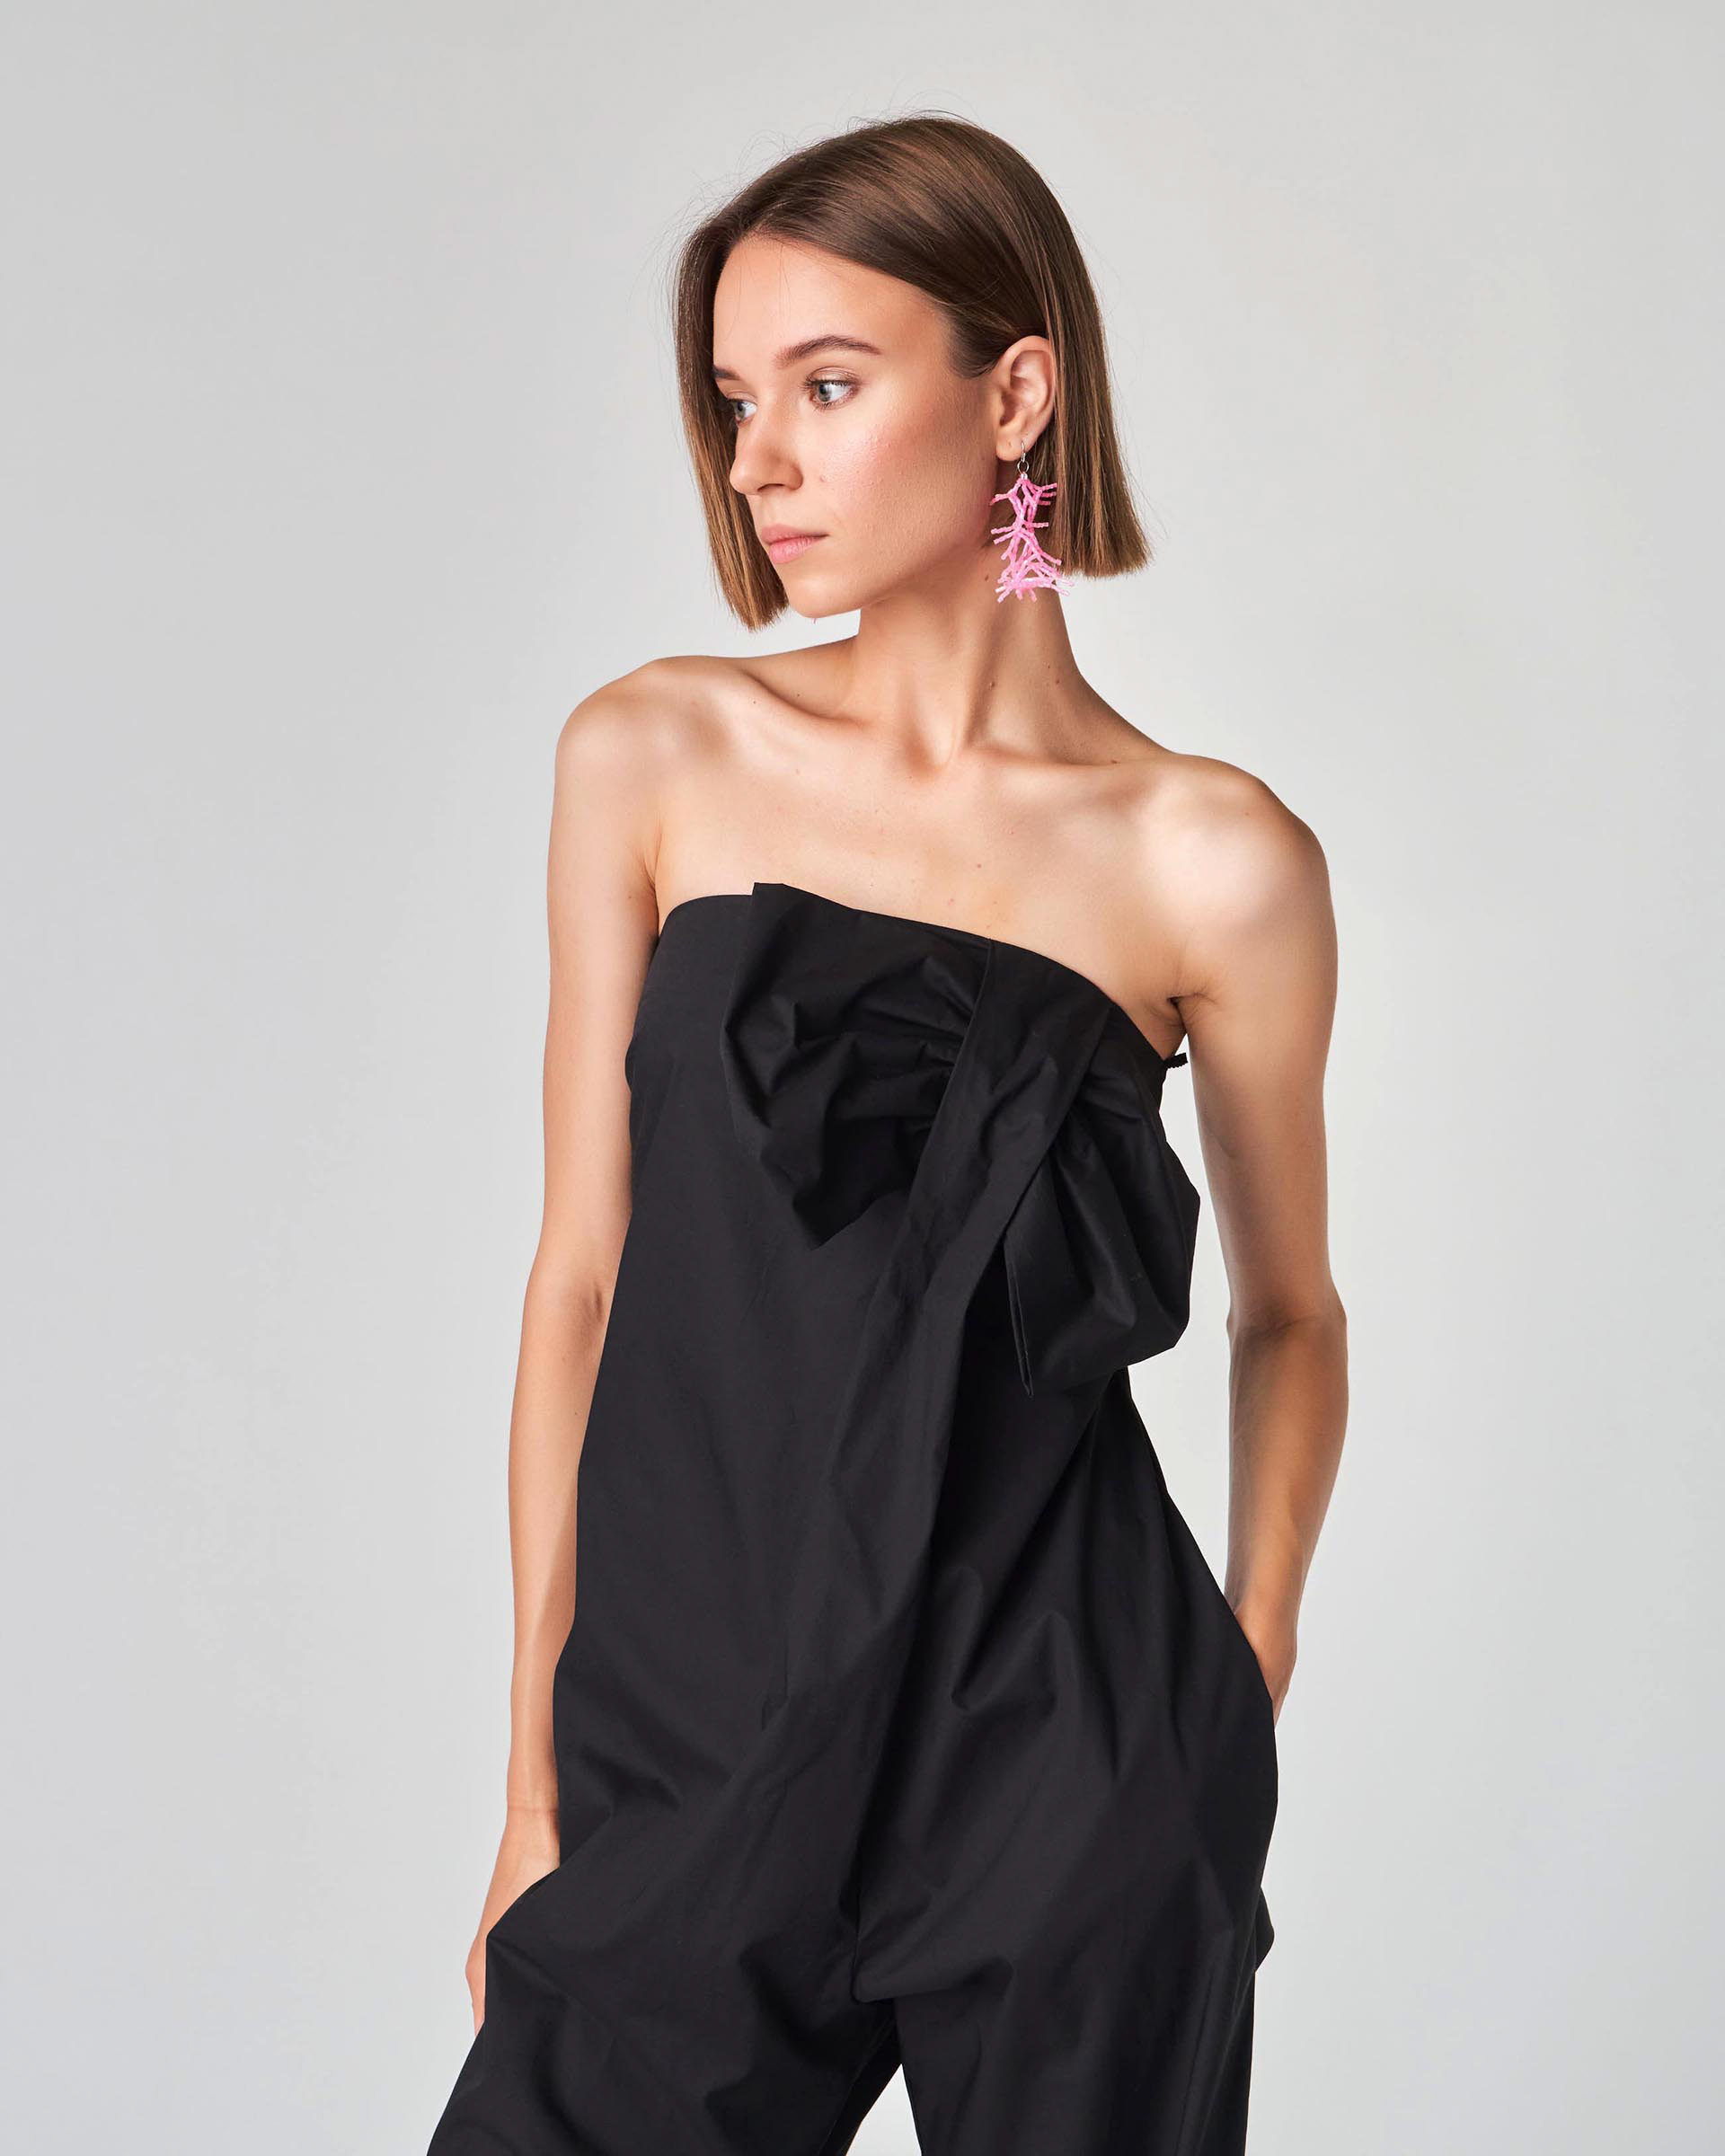 The Market Store | Jumpsuit With Bow